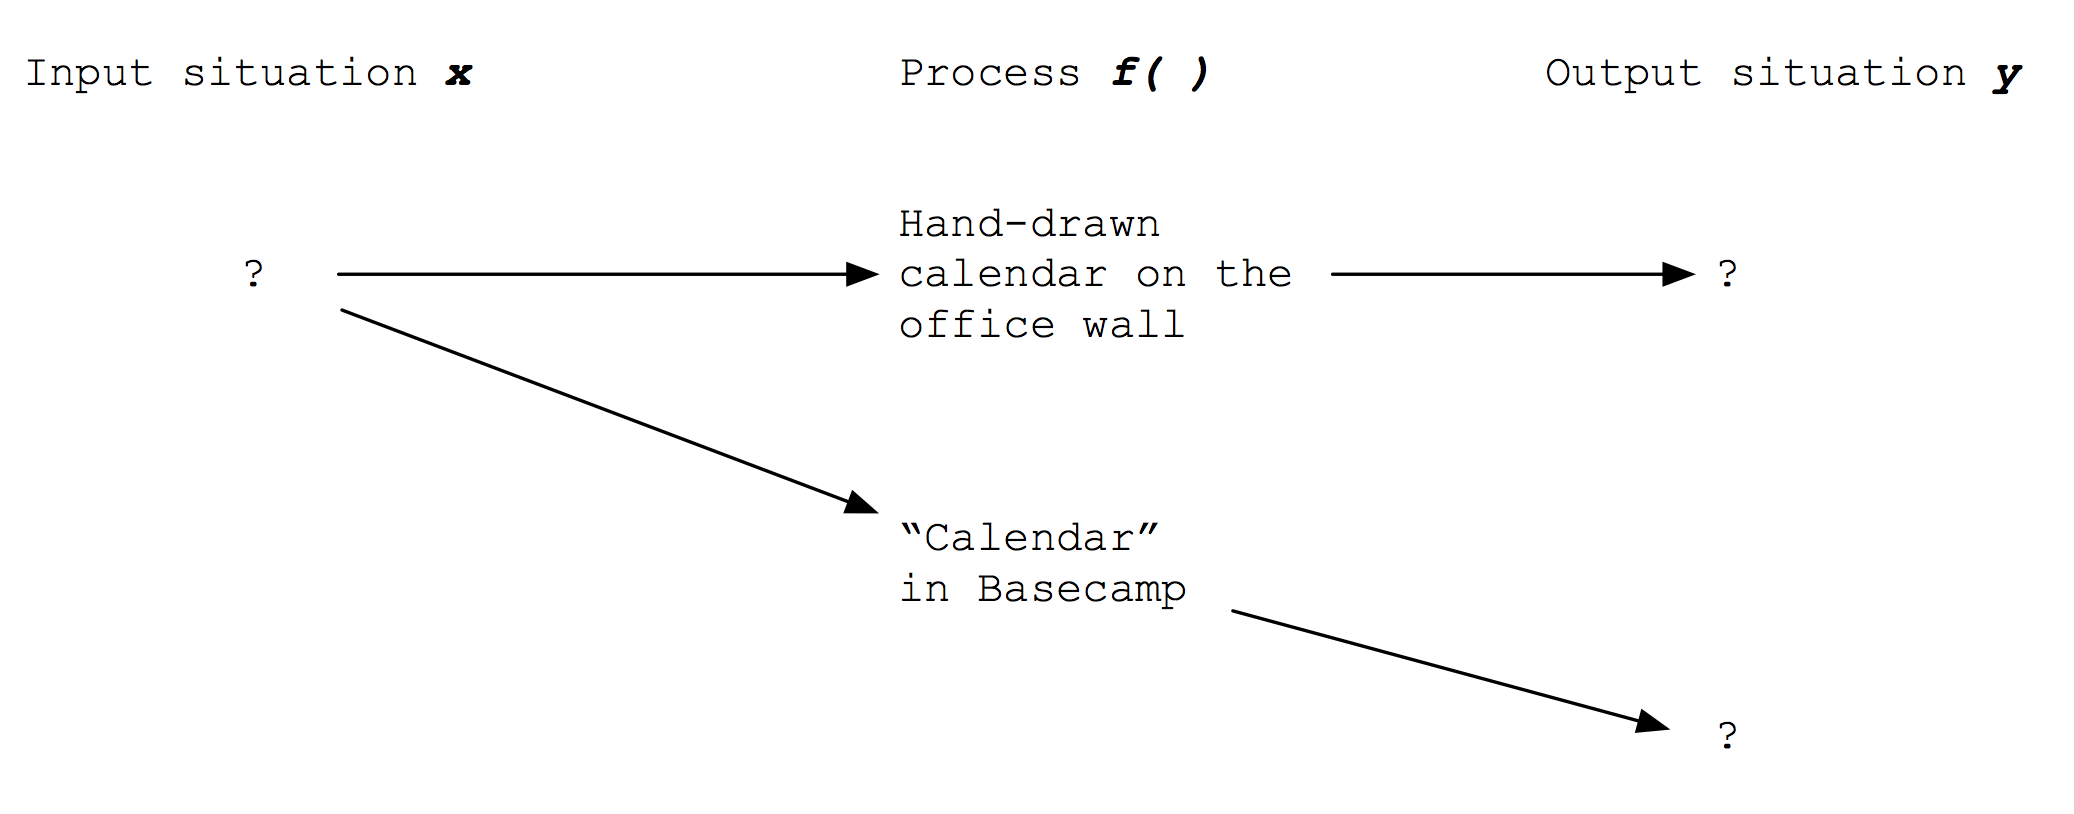 Function they currently use for calendar 